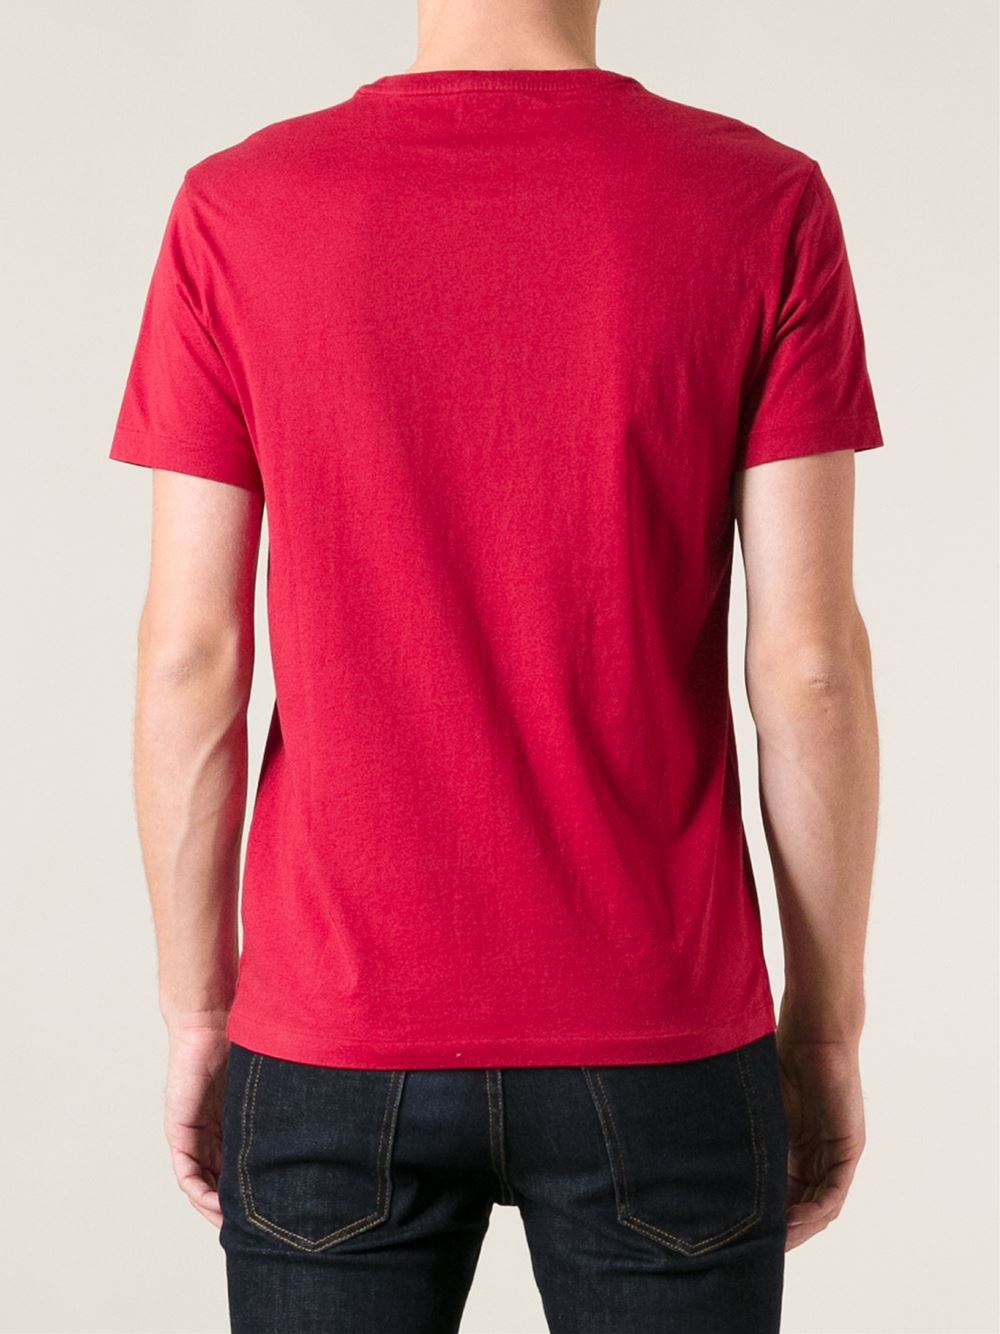 Lyst - Polo Ralph Lauren Embroidered Logo T-Shirt in Red for Men